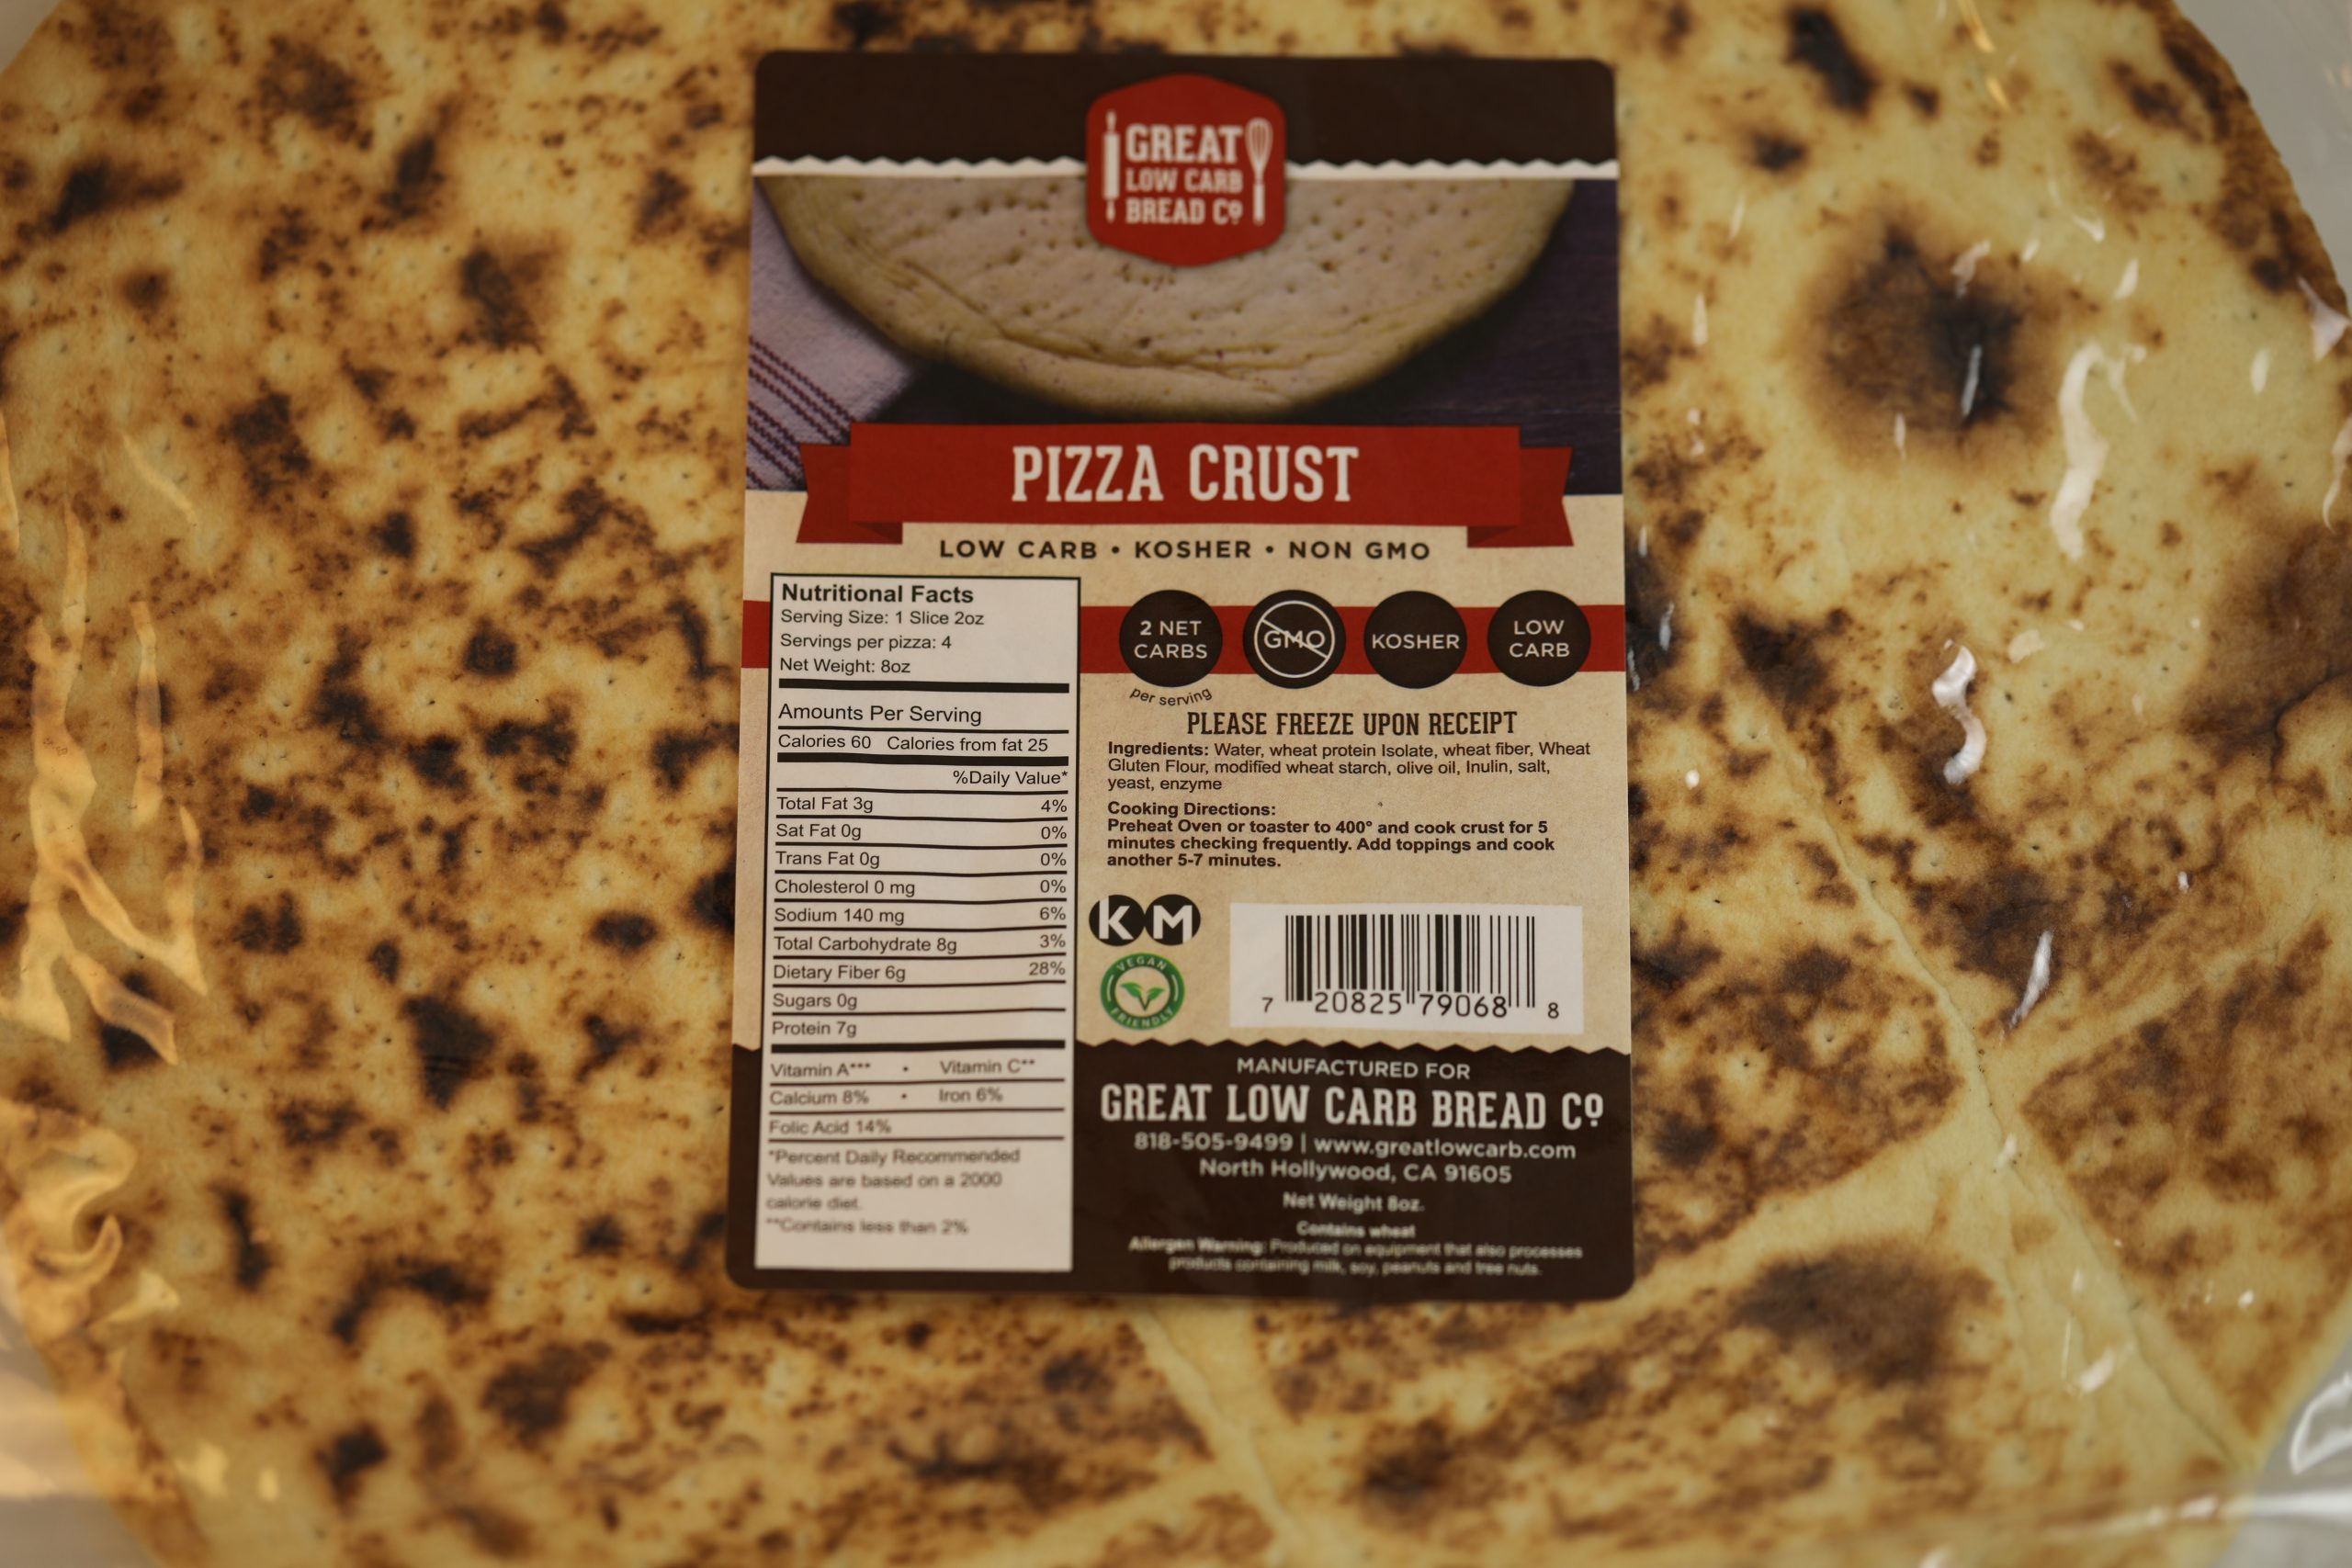 Great Low Carb Pizza Crust 9" 15 Bags Case